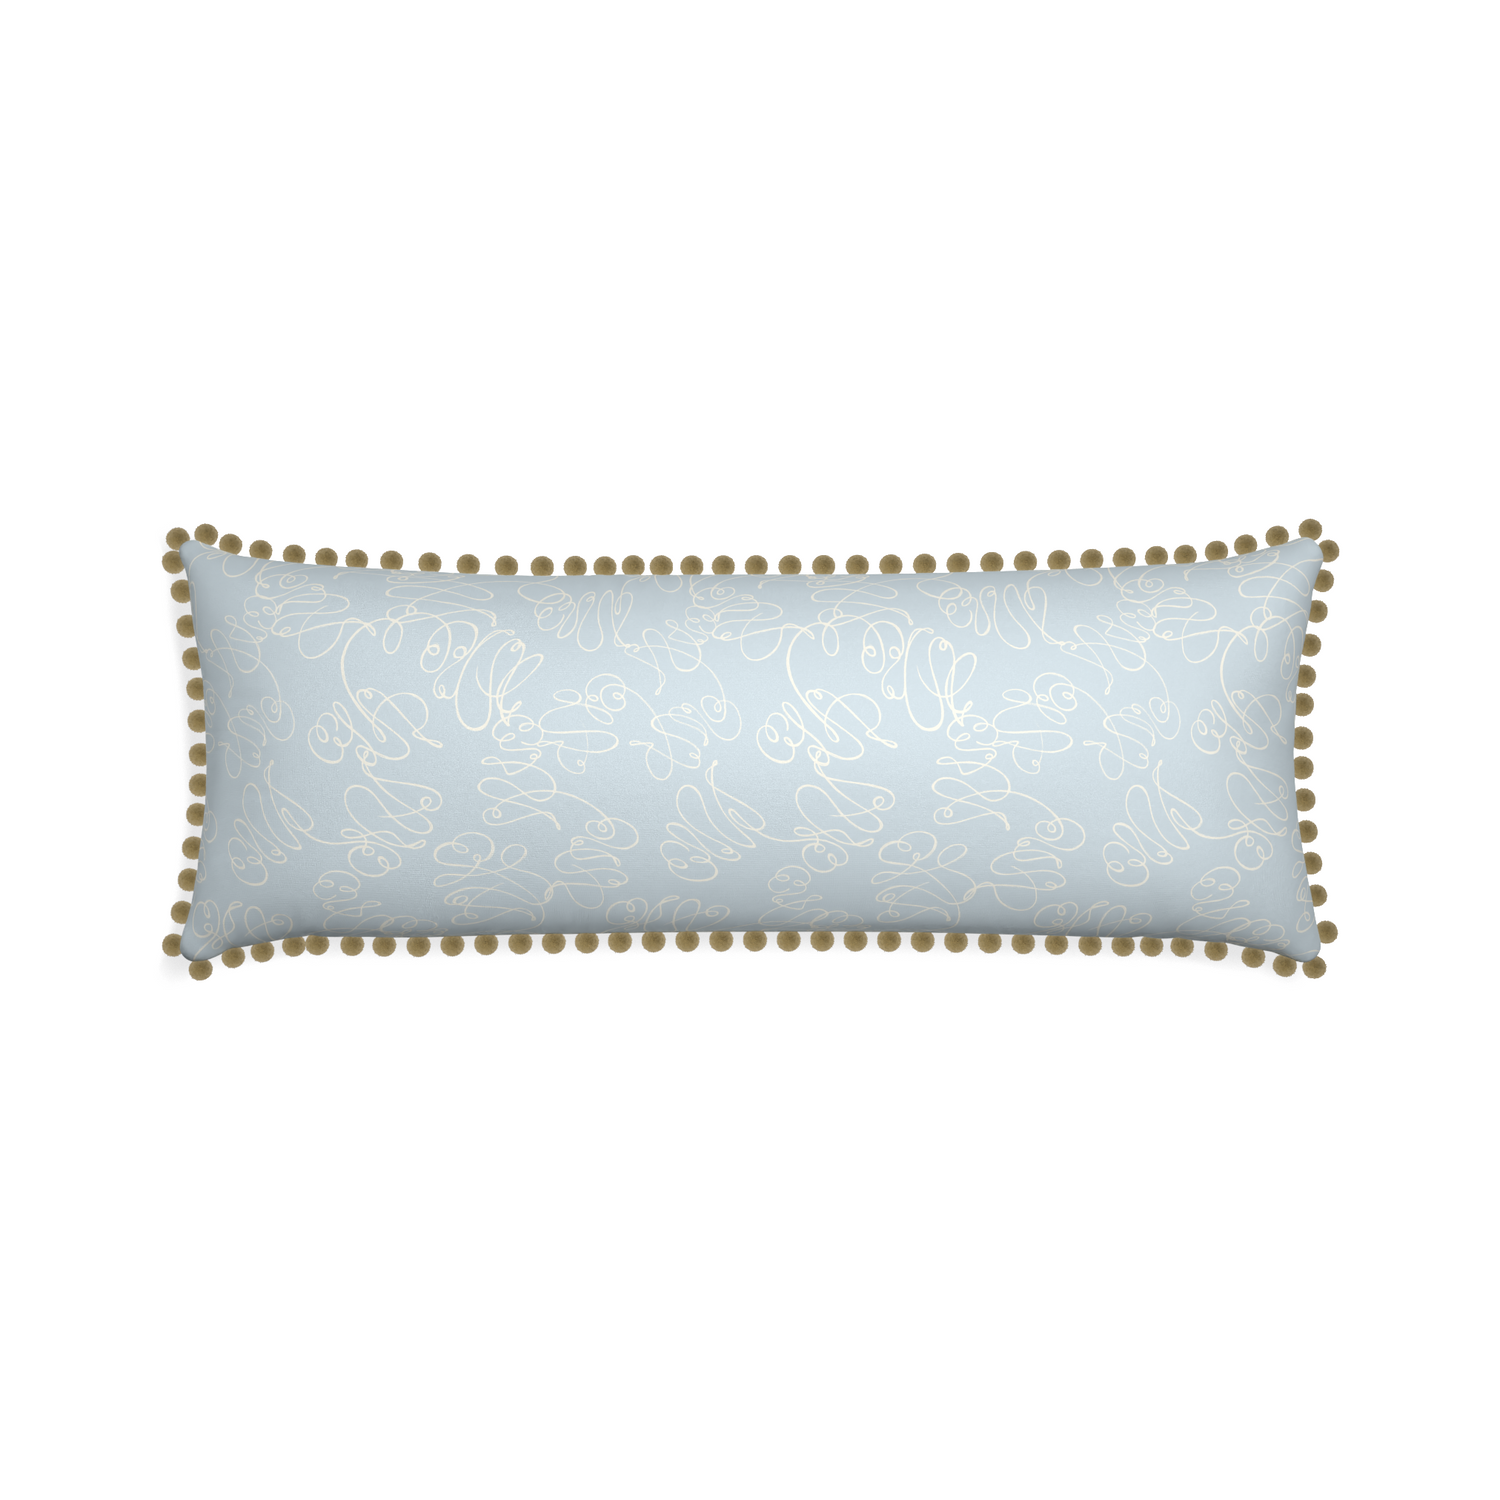 Xl-lumbar mirabella custom pillow with olive pom pom on white background